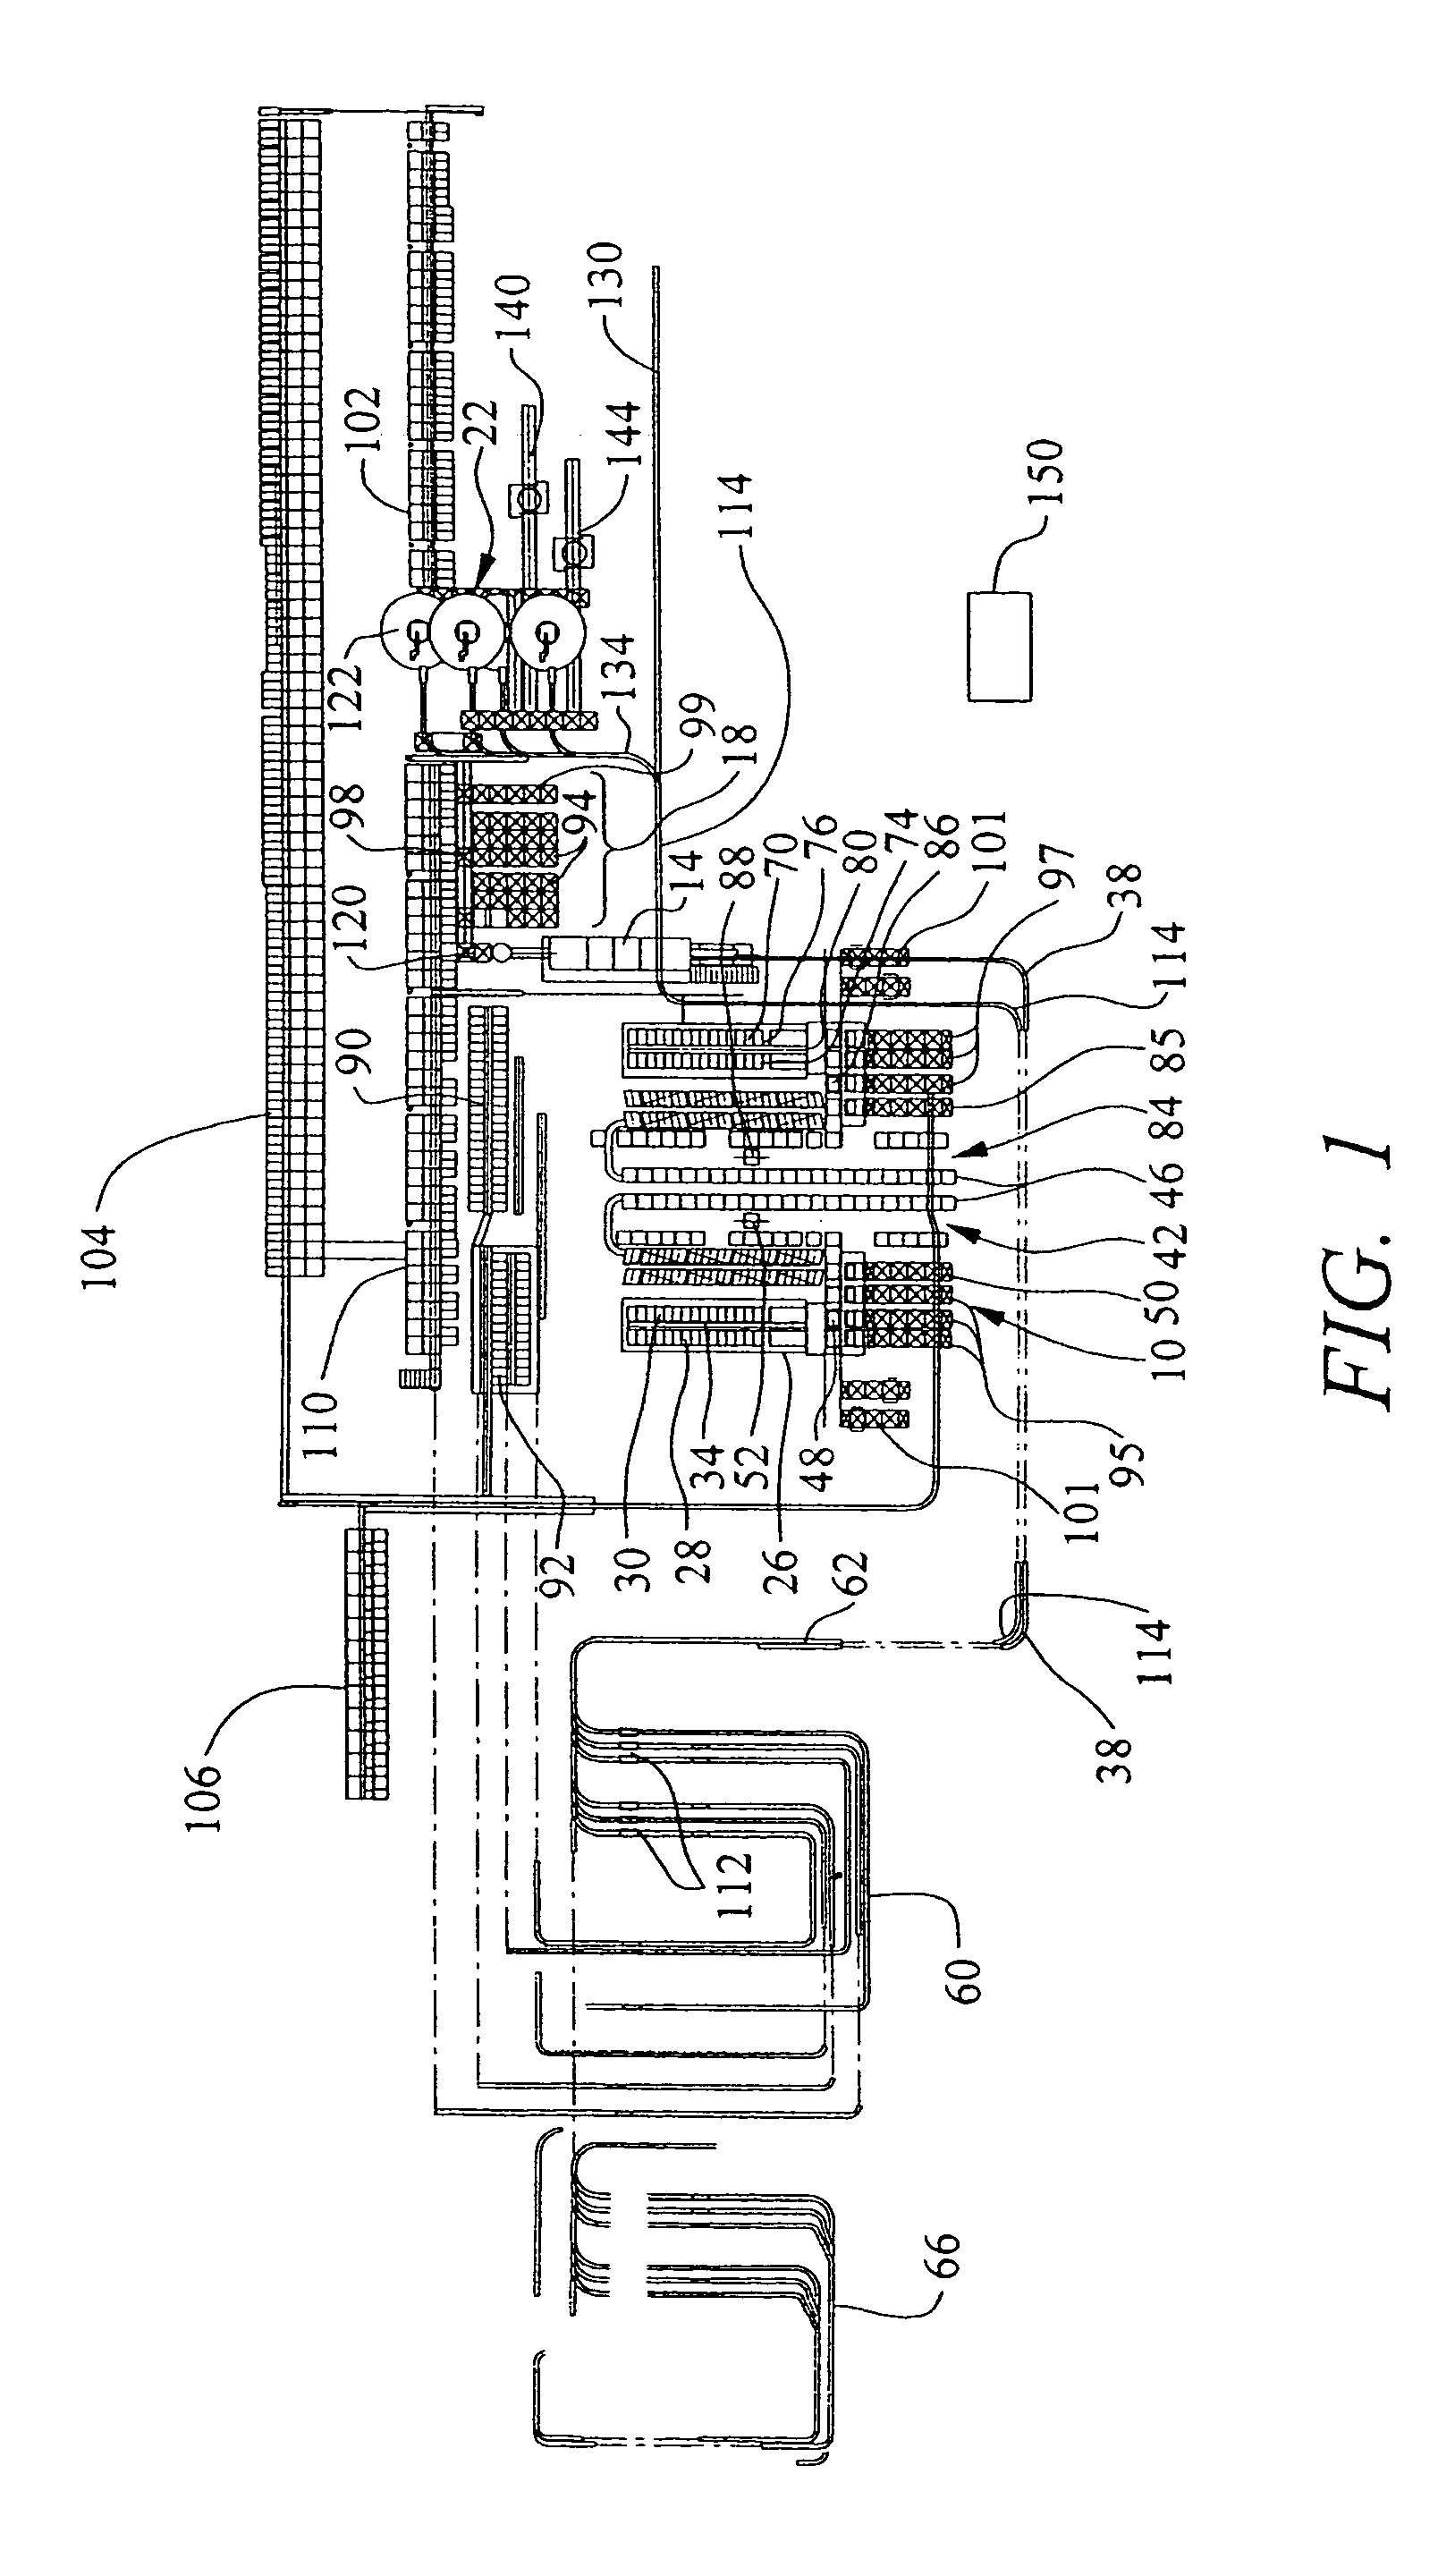 Automated container storage and delivery system